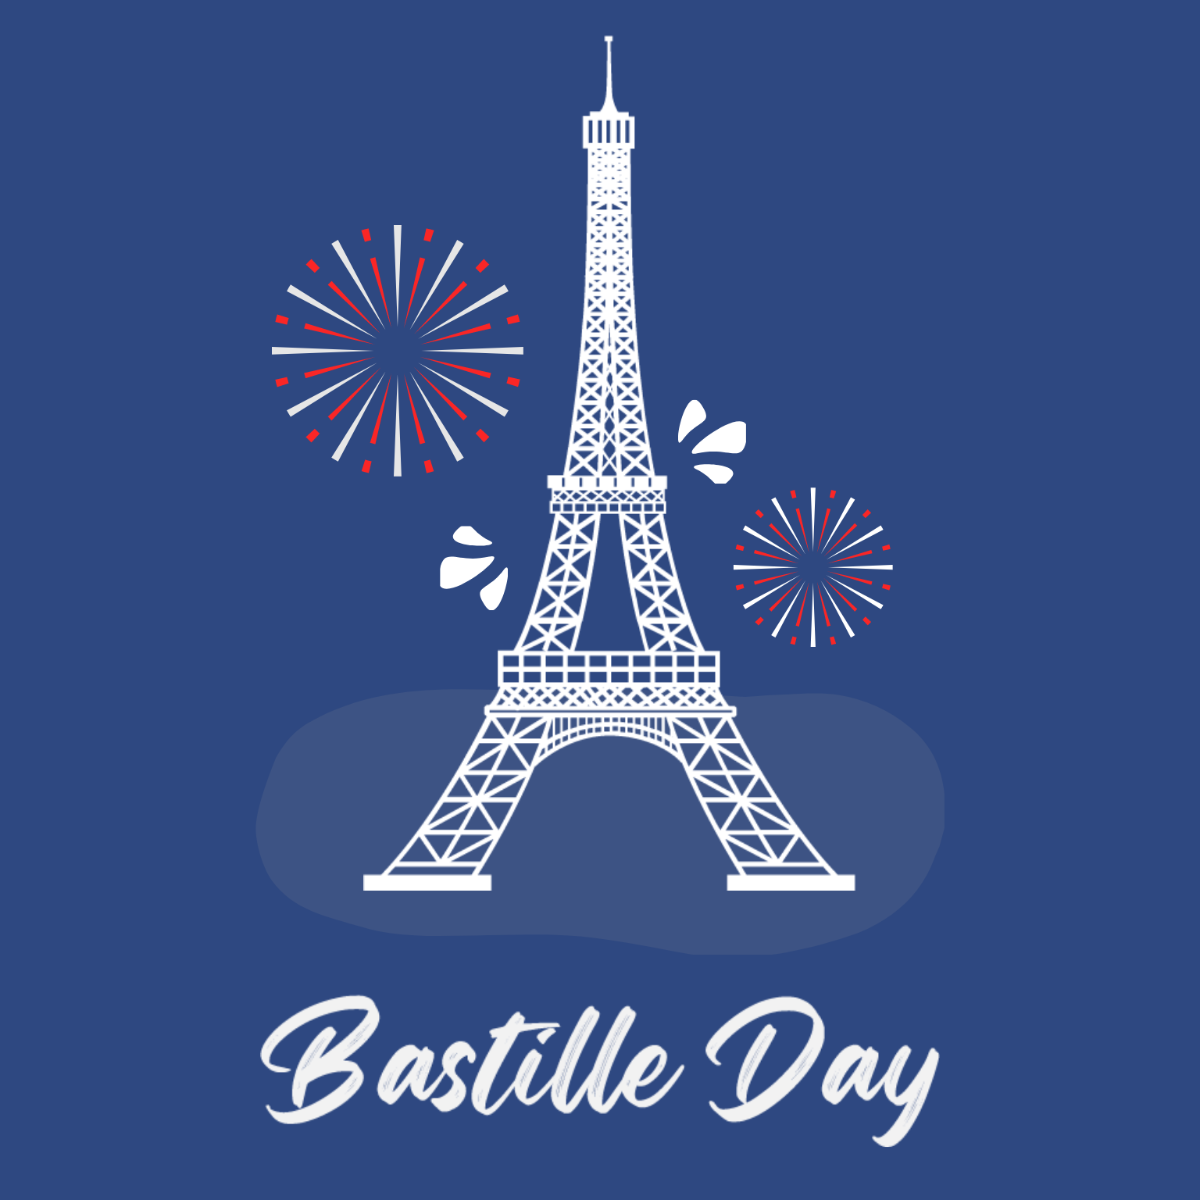 Free Bastille Day Vector Template